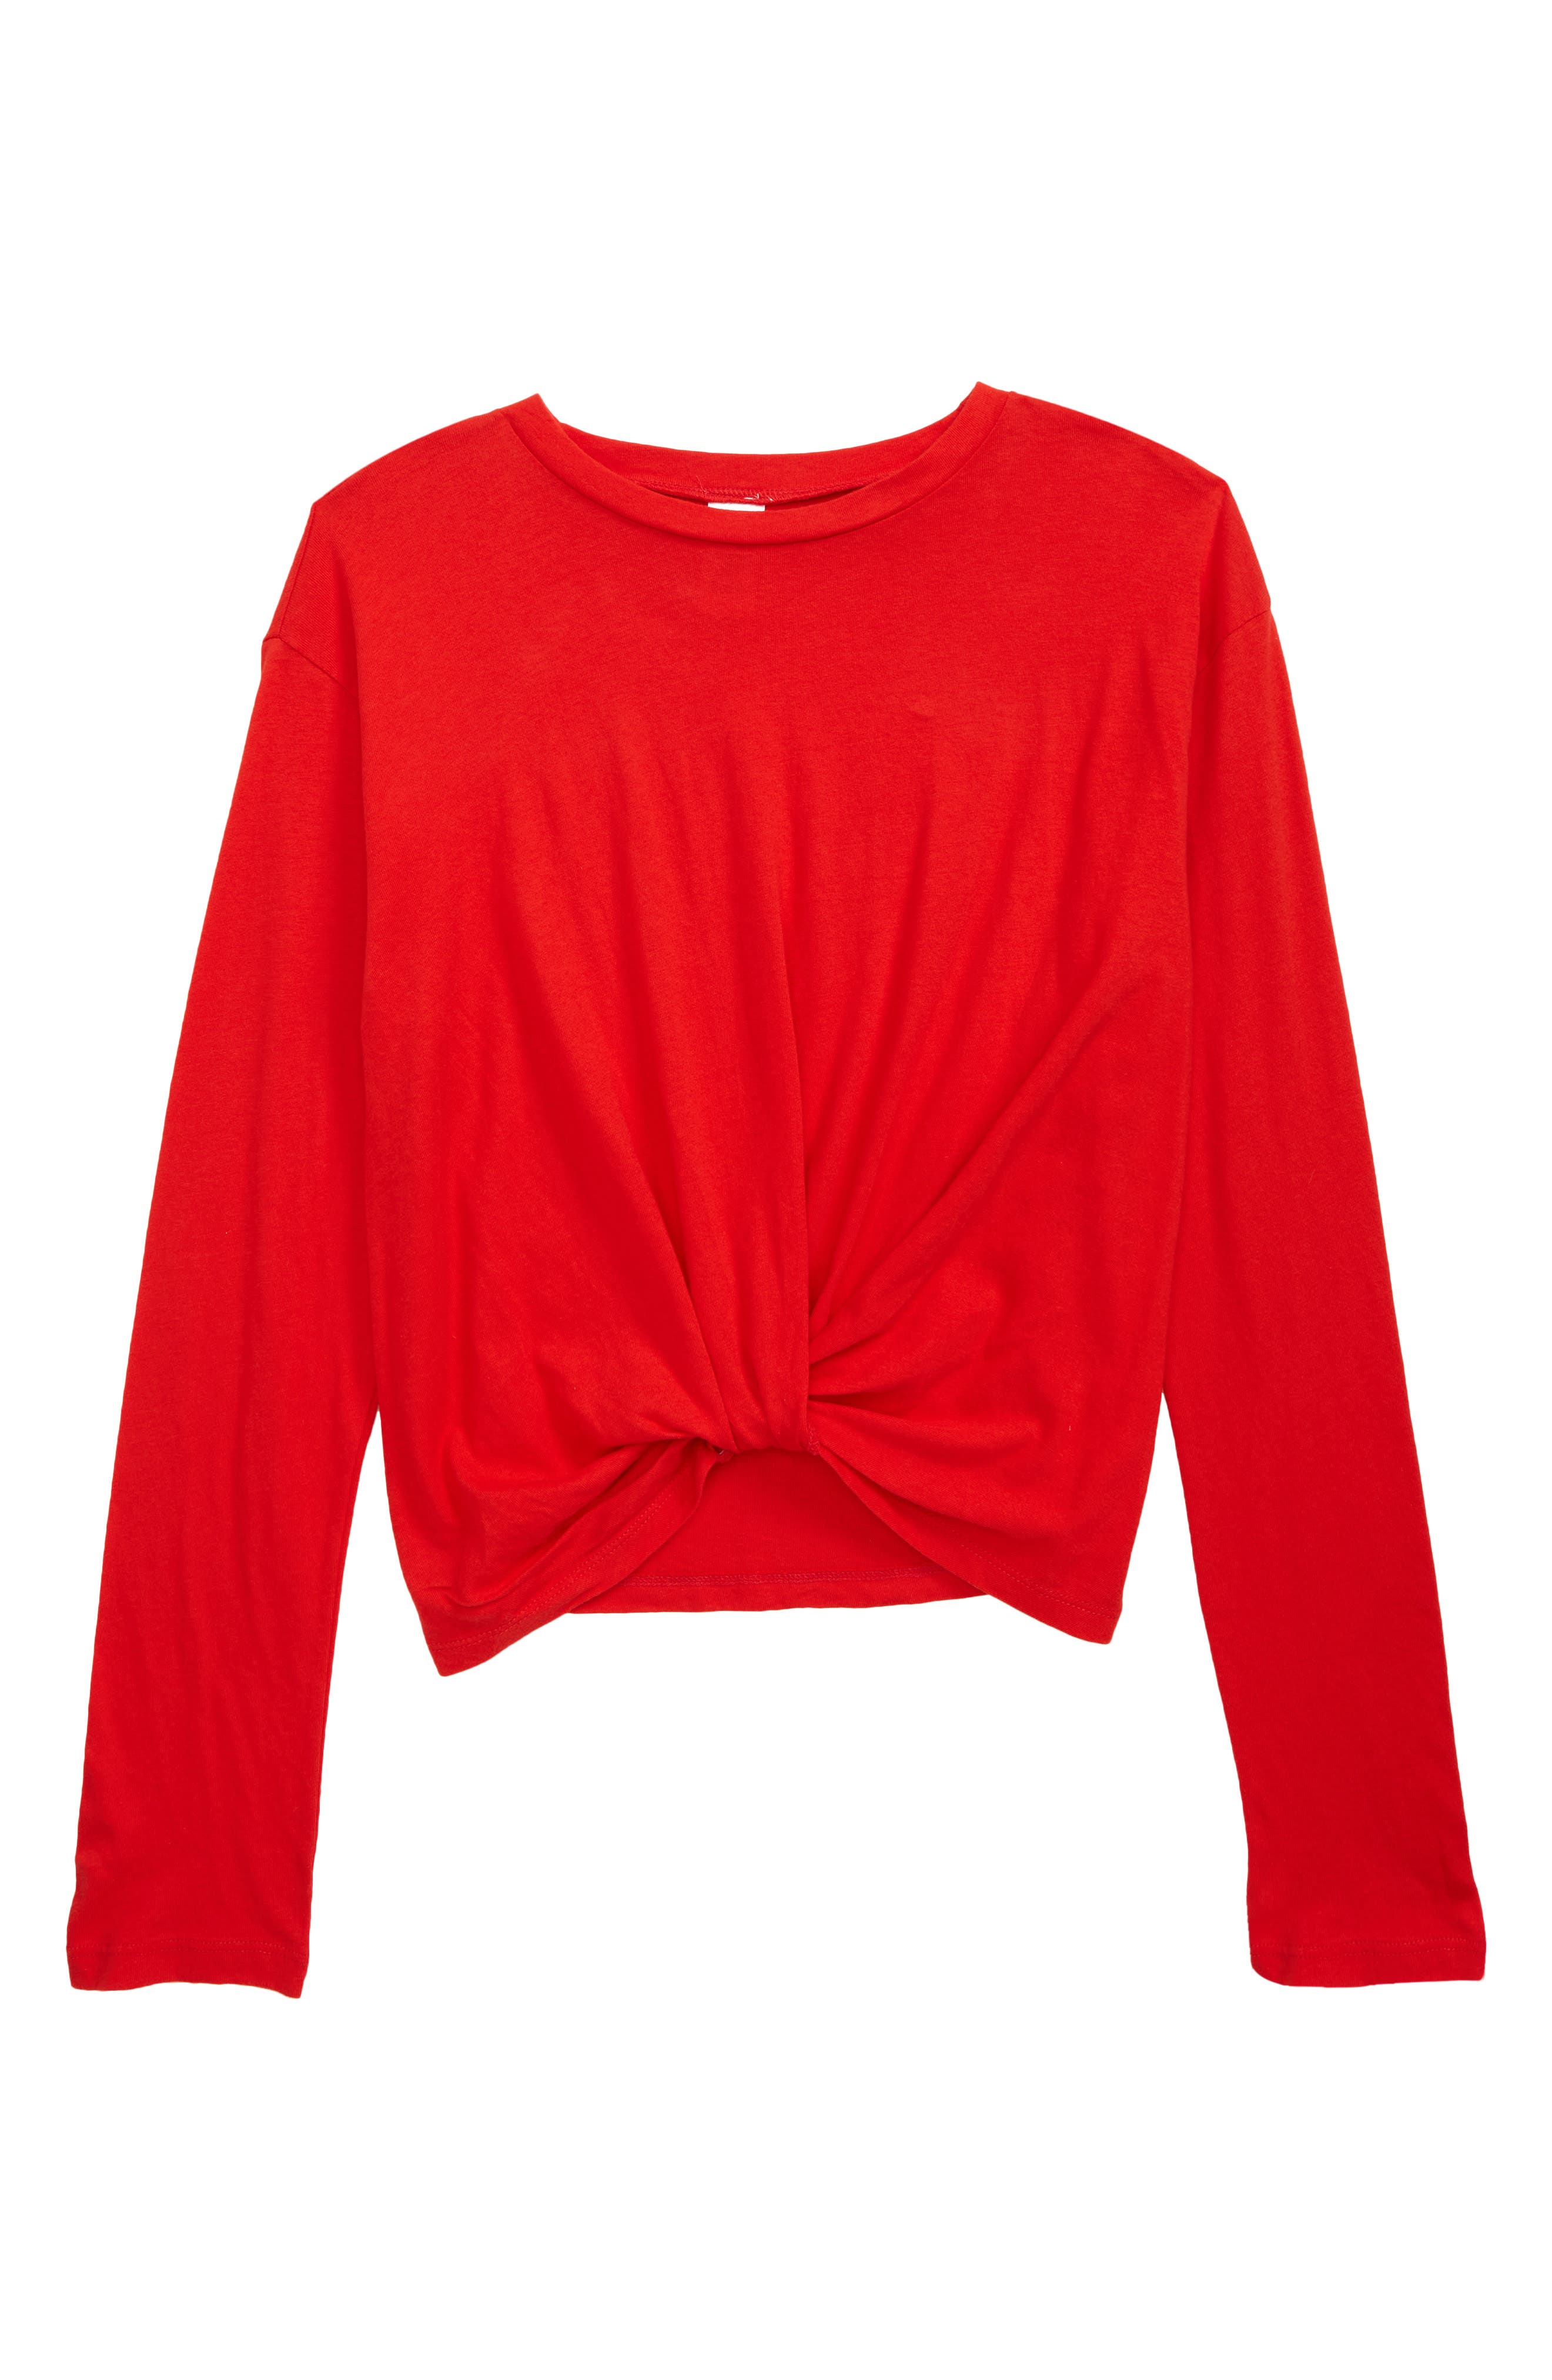 red tops for girls